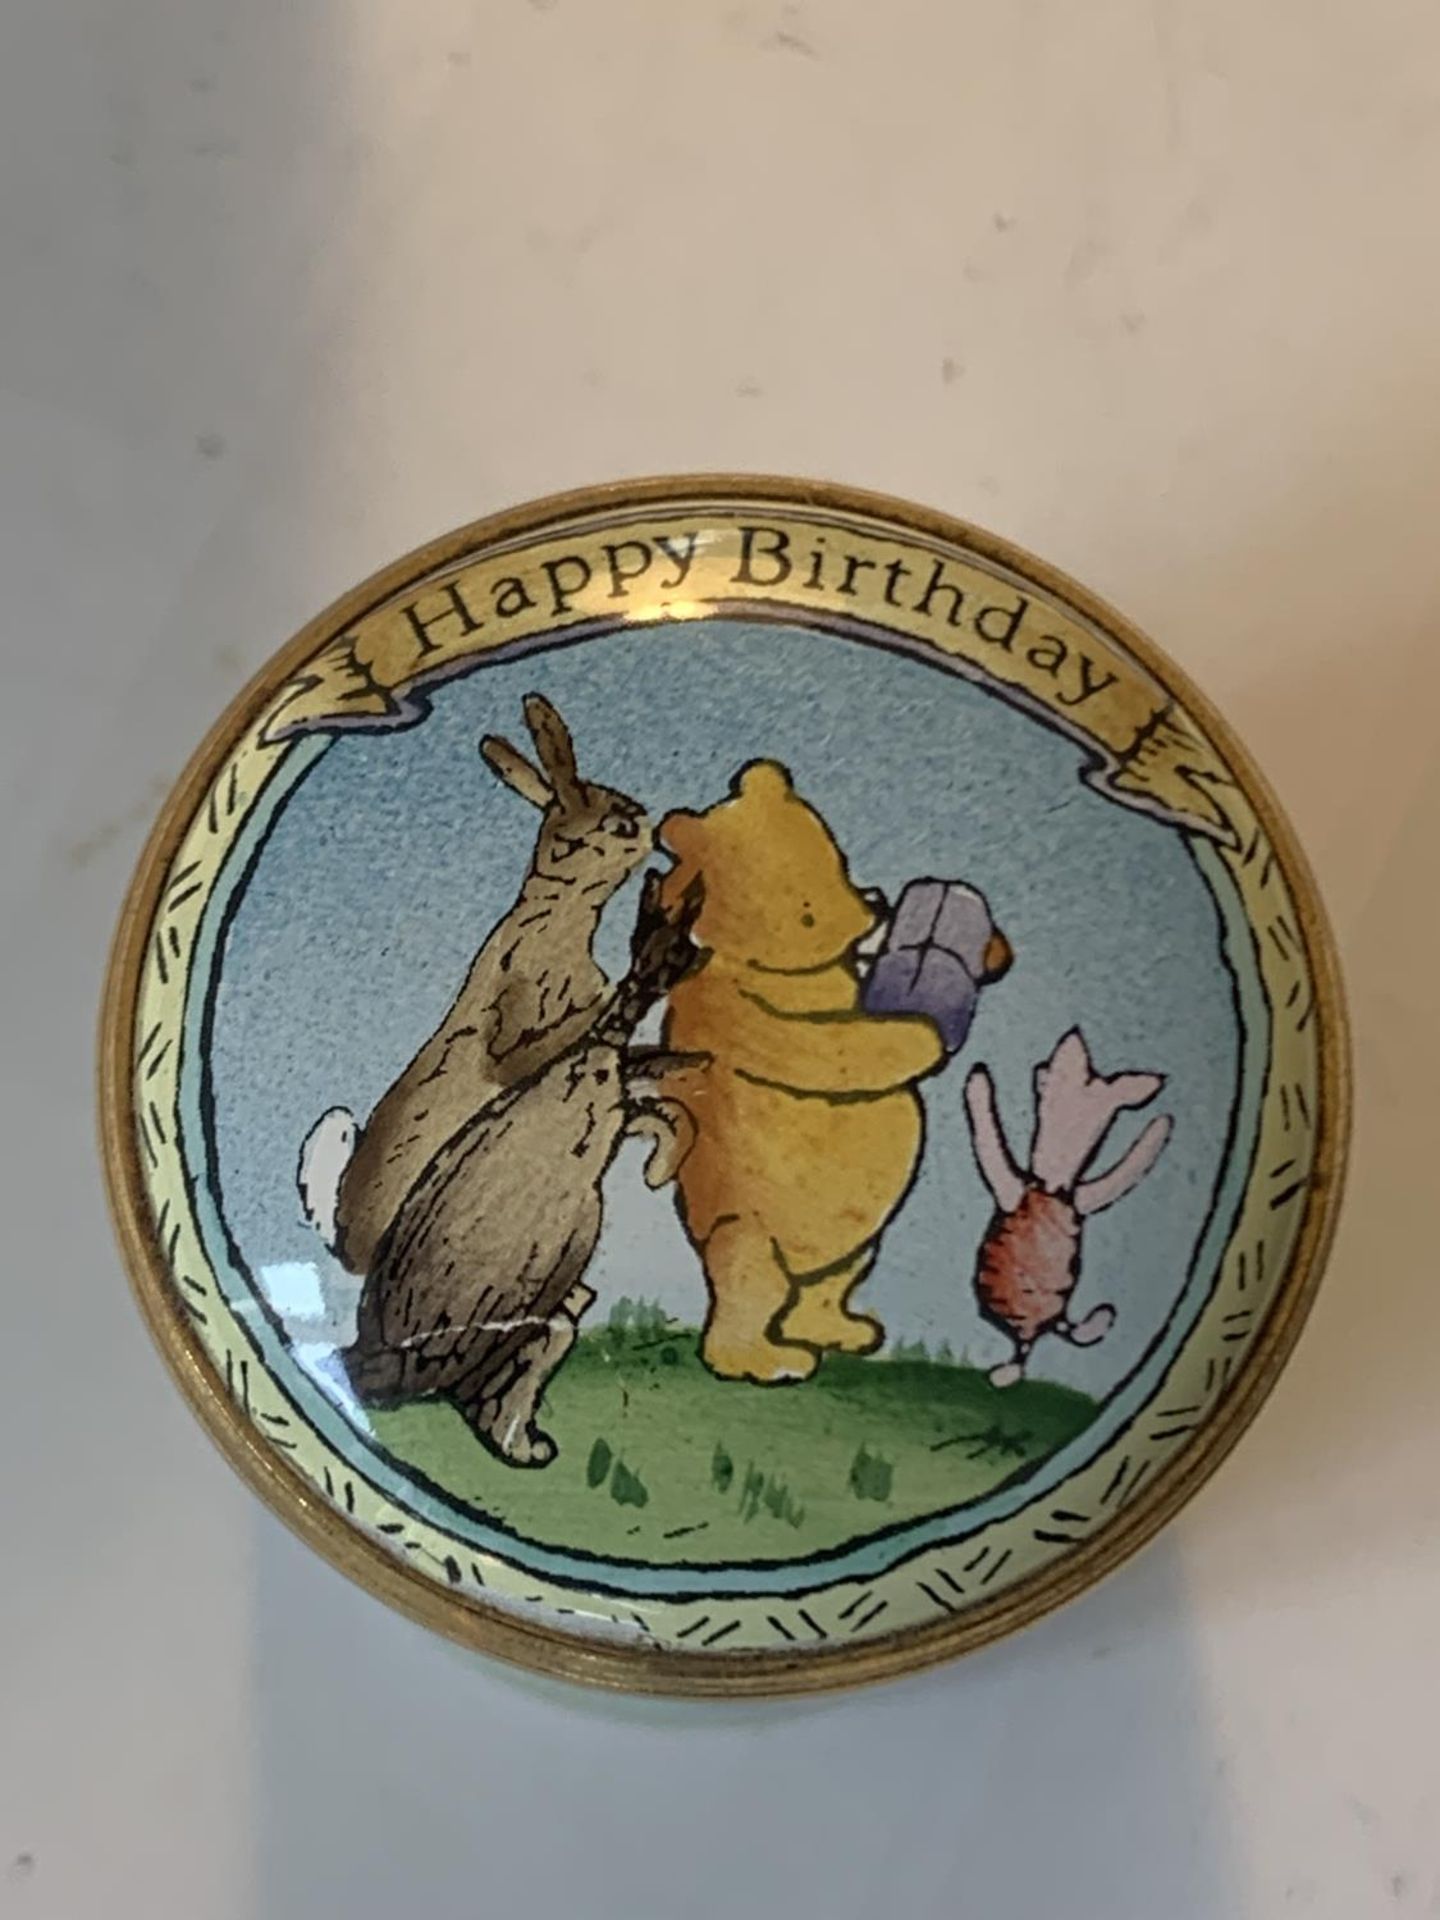 A HAND PAINTED ENAMEL POT DEPICTING POOH BEAR AND A GOLD PLATED PERFUME BOTTLE - Image 2 of 4